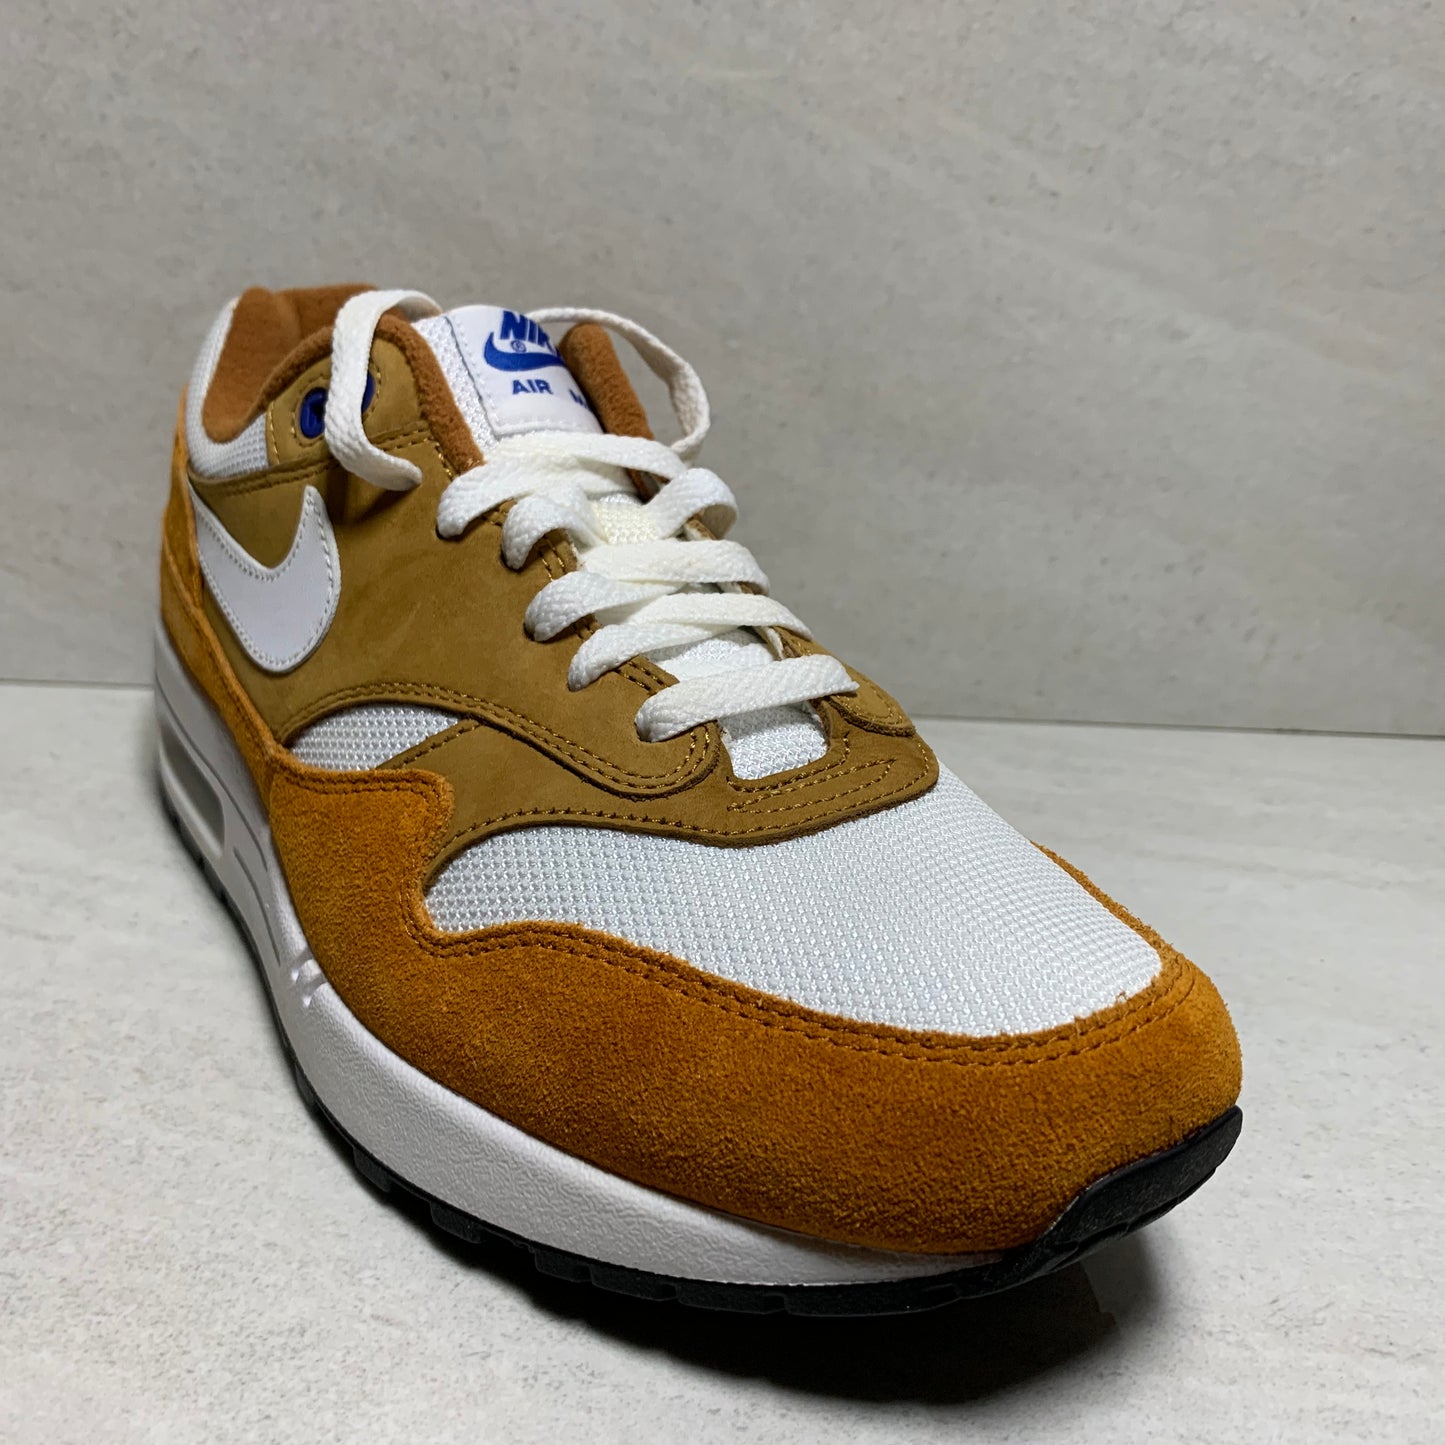 Nike Air Max 1 Curry (2018) - 908366-700 - Homme Taille 7.5